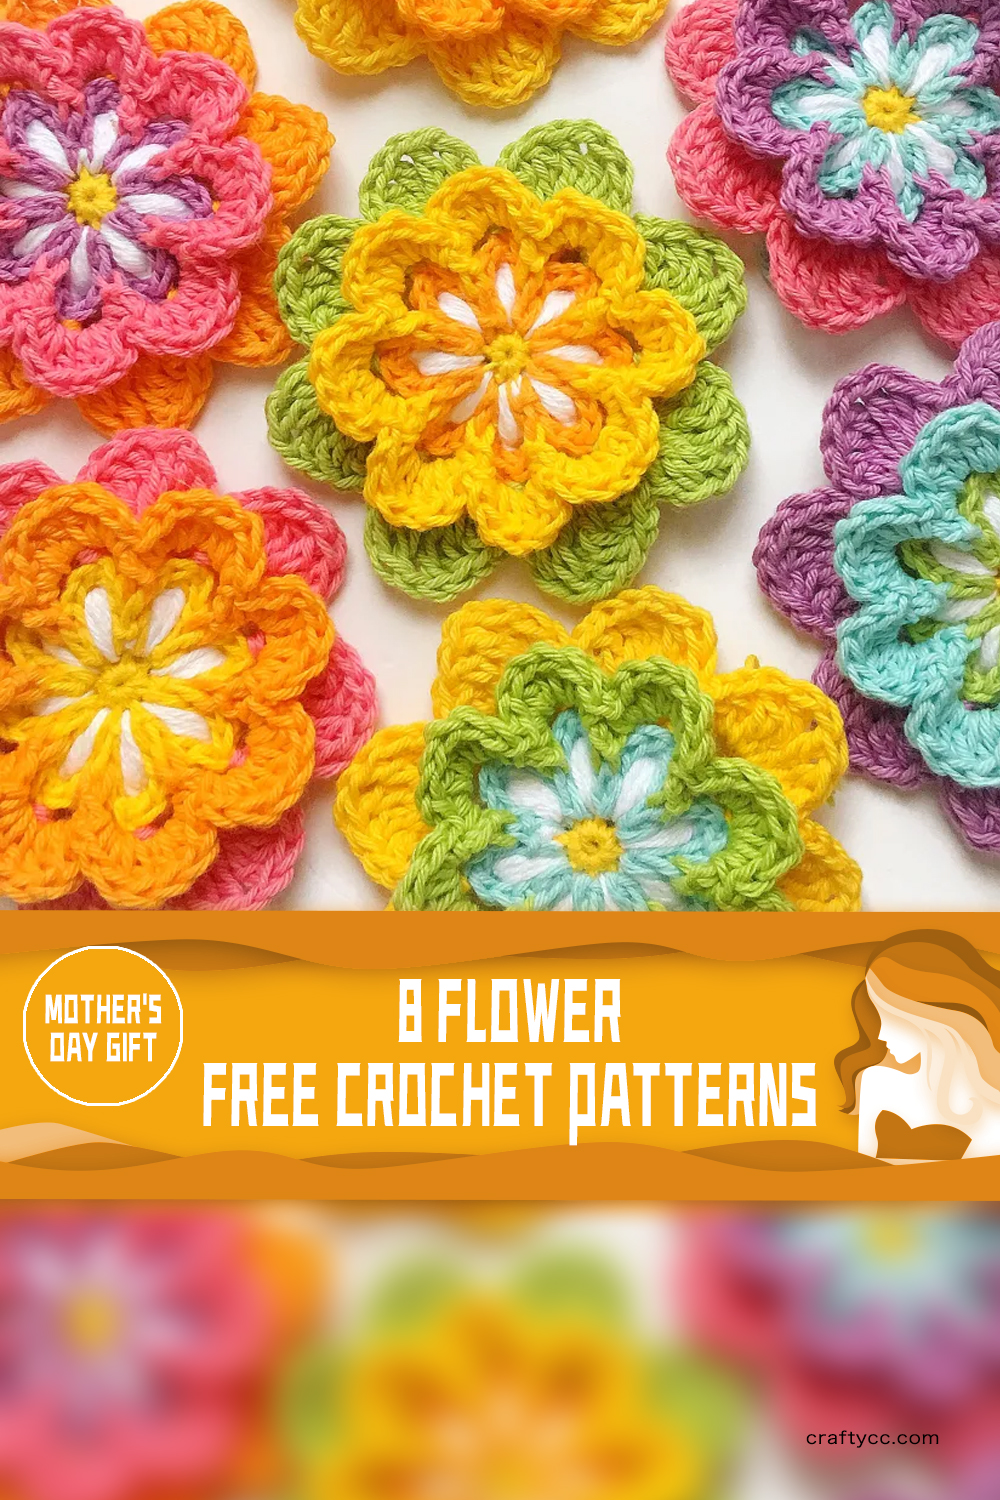 Mother's Day Gift - 8 Flower FREE Patterns